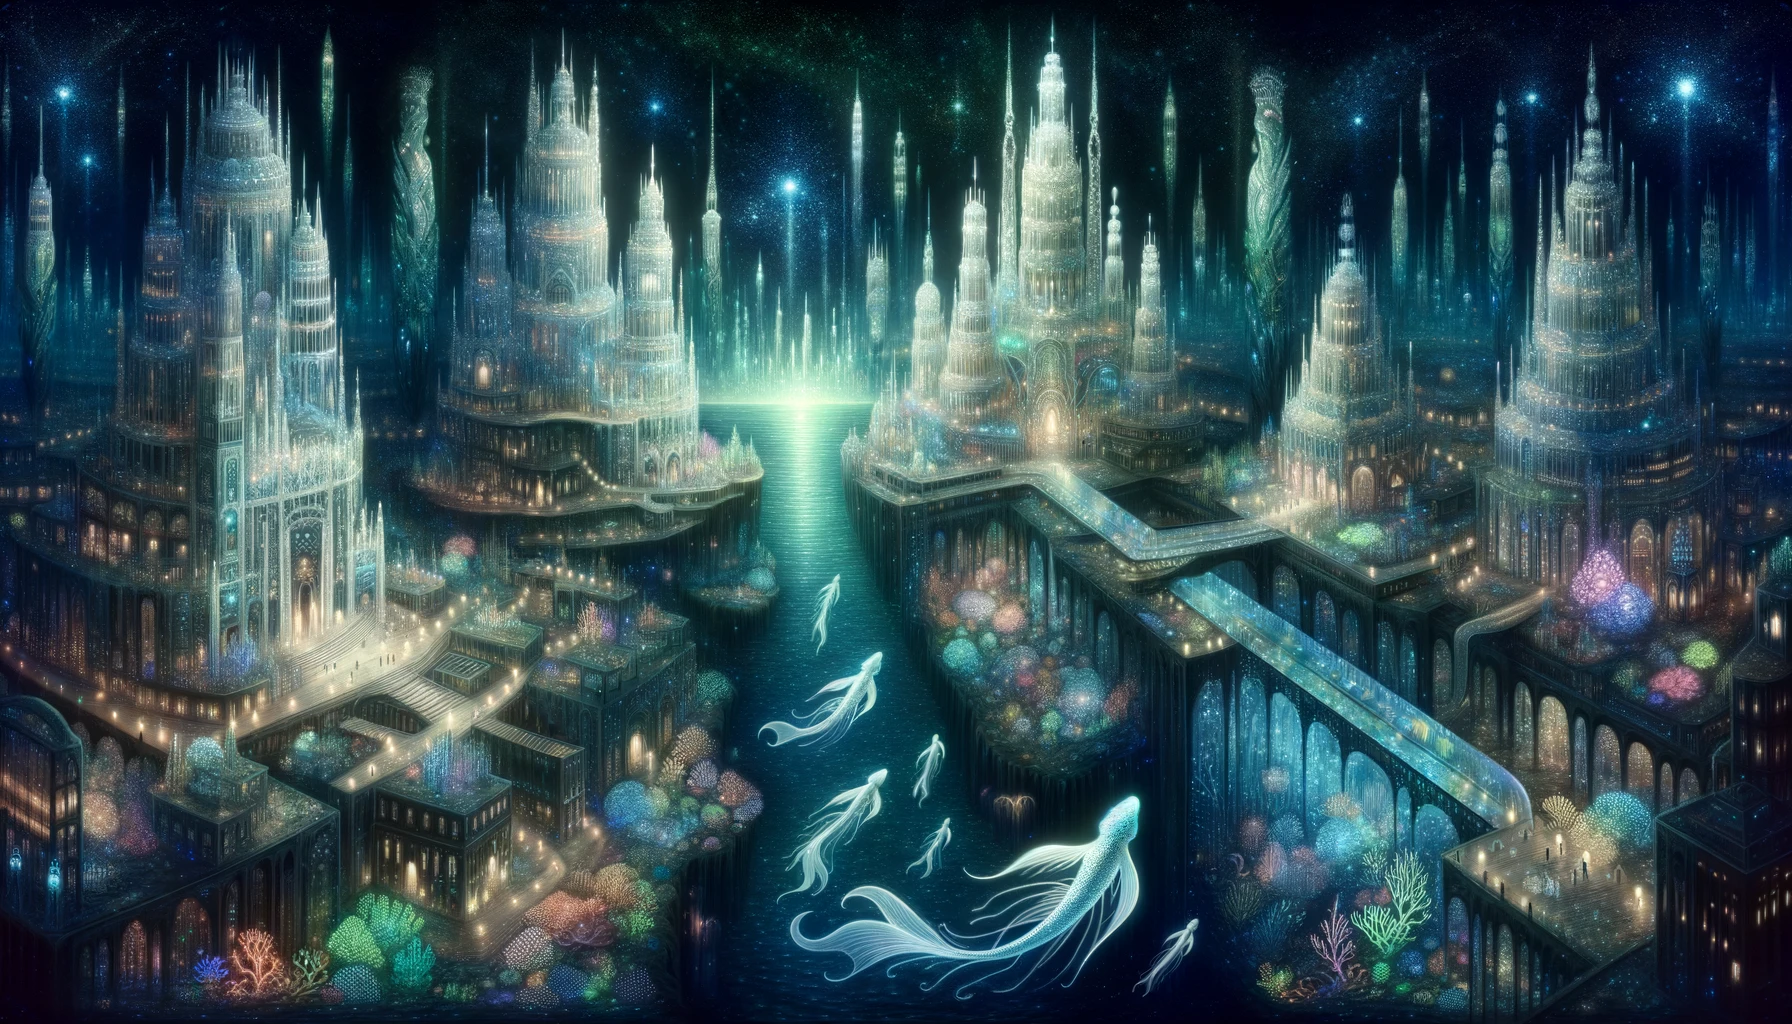 Artistic depiction of a city deep under the sea. Majestic crystal palaces, their designs intricate and mesmerizing, form the city's skyline. Bioluminescent beings, both flora and fauna, ensure that the city is never in darkness, their radiant light creating a dreamy ambiance. Merfolk, the city's residents, swim with poise and purpose, their lives intertwined with the city's rhythm. Connecting the various palaces and domains are transparent tunnels, acting as both transport routes and viewing galleries for the wonders of the deep.